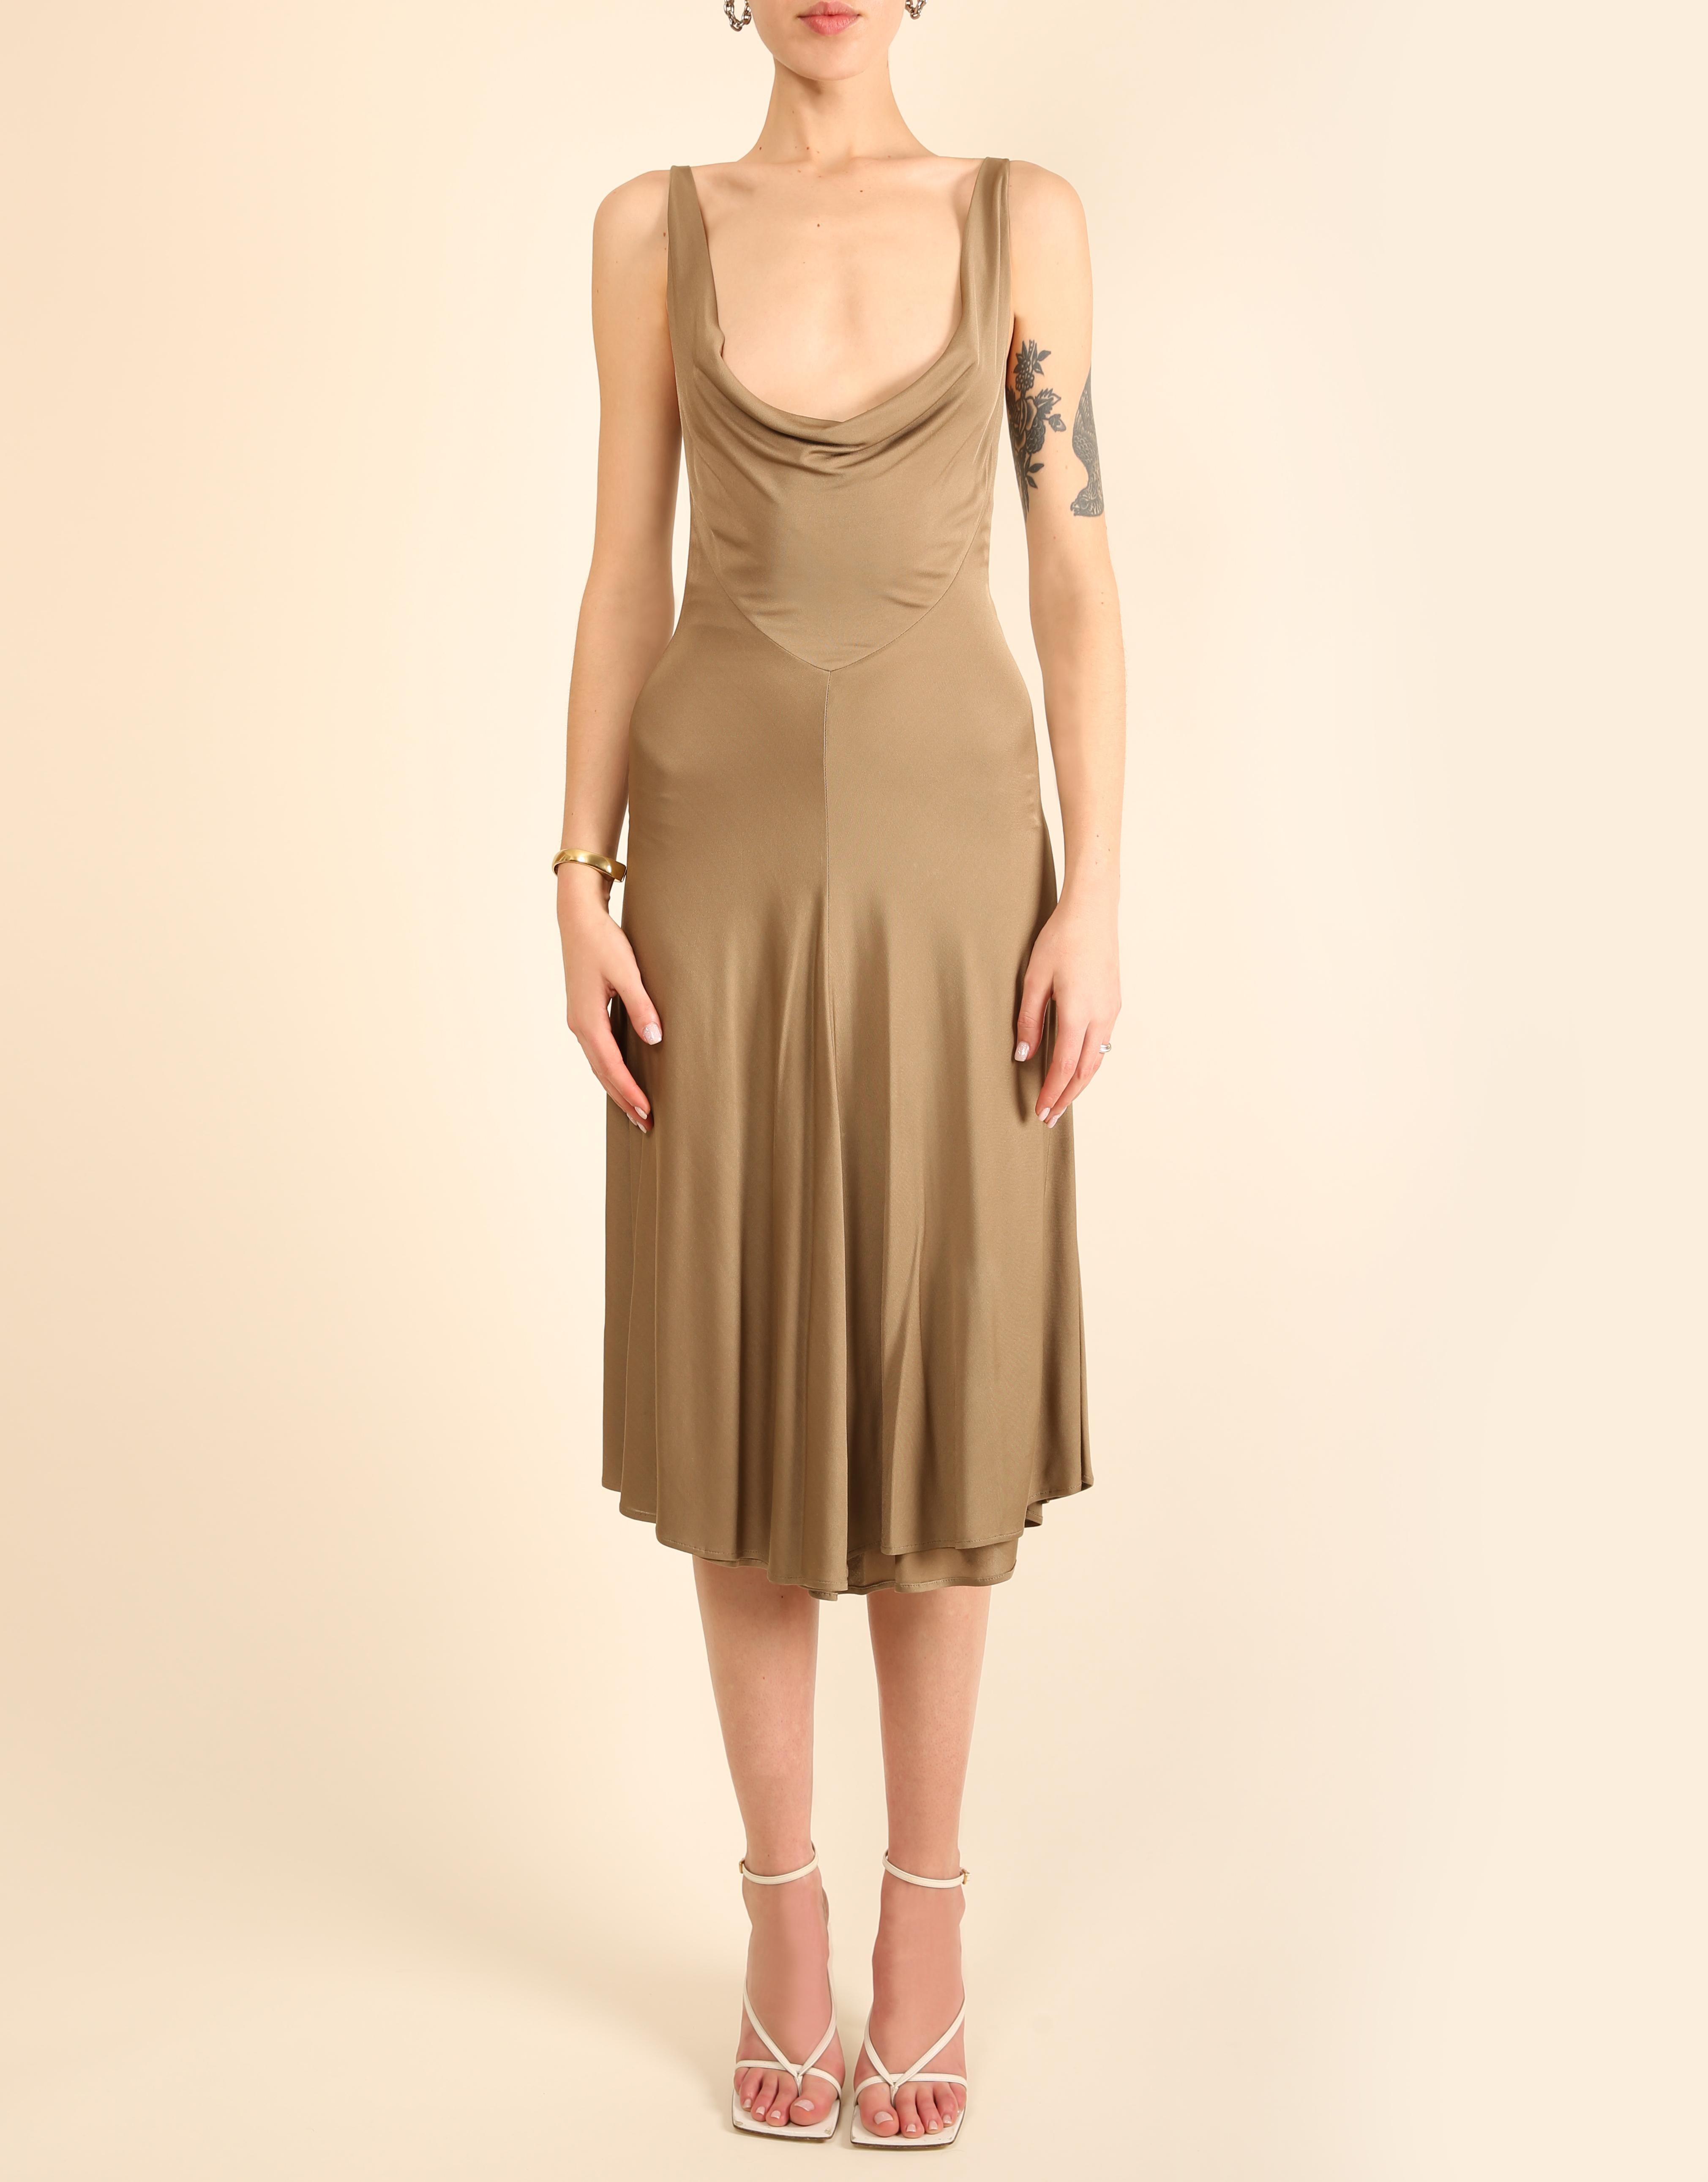 Thierry Mugler Couture sleeveless midi length dress in taupe
Fitted upper with a flared skirt
Stretch fabric
A very low cut draped plunging neckline 
Double lined

Size:
No size label - estimated to fit a FR 34 - 36, but pleaser refer to the